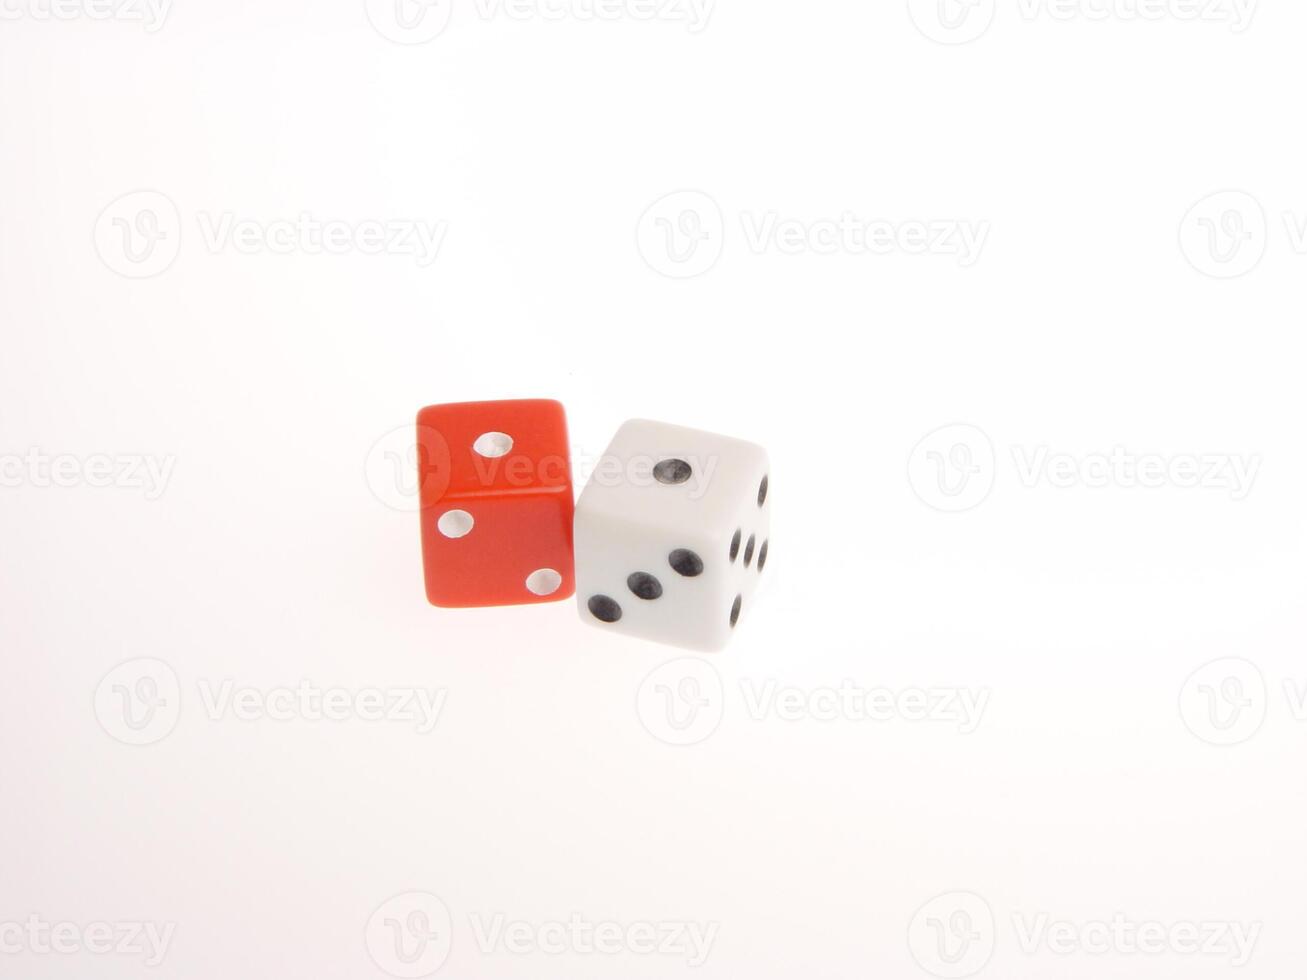 Snake Eyes Red And White Dice Showing Ones photo